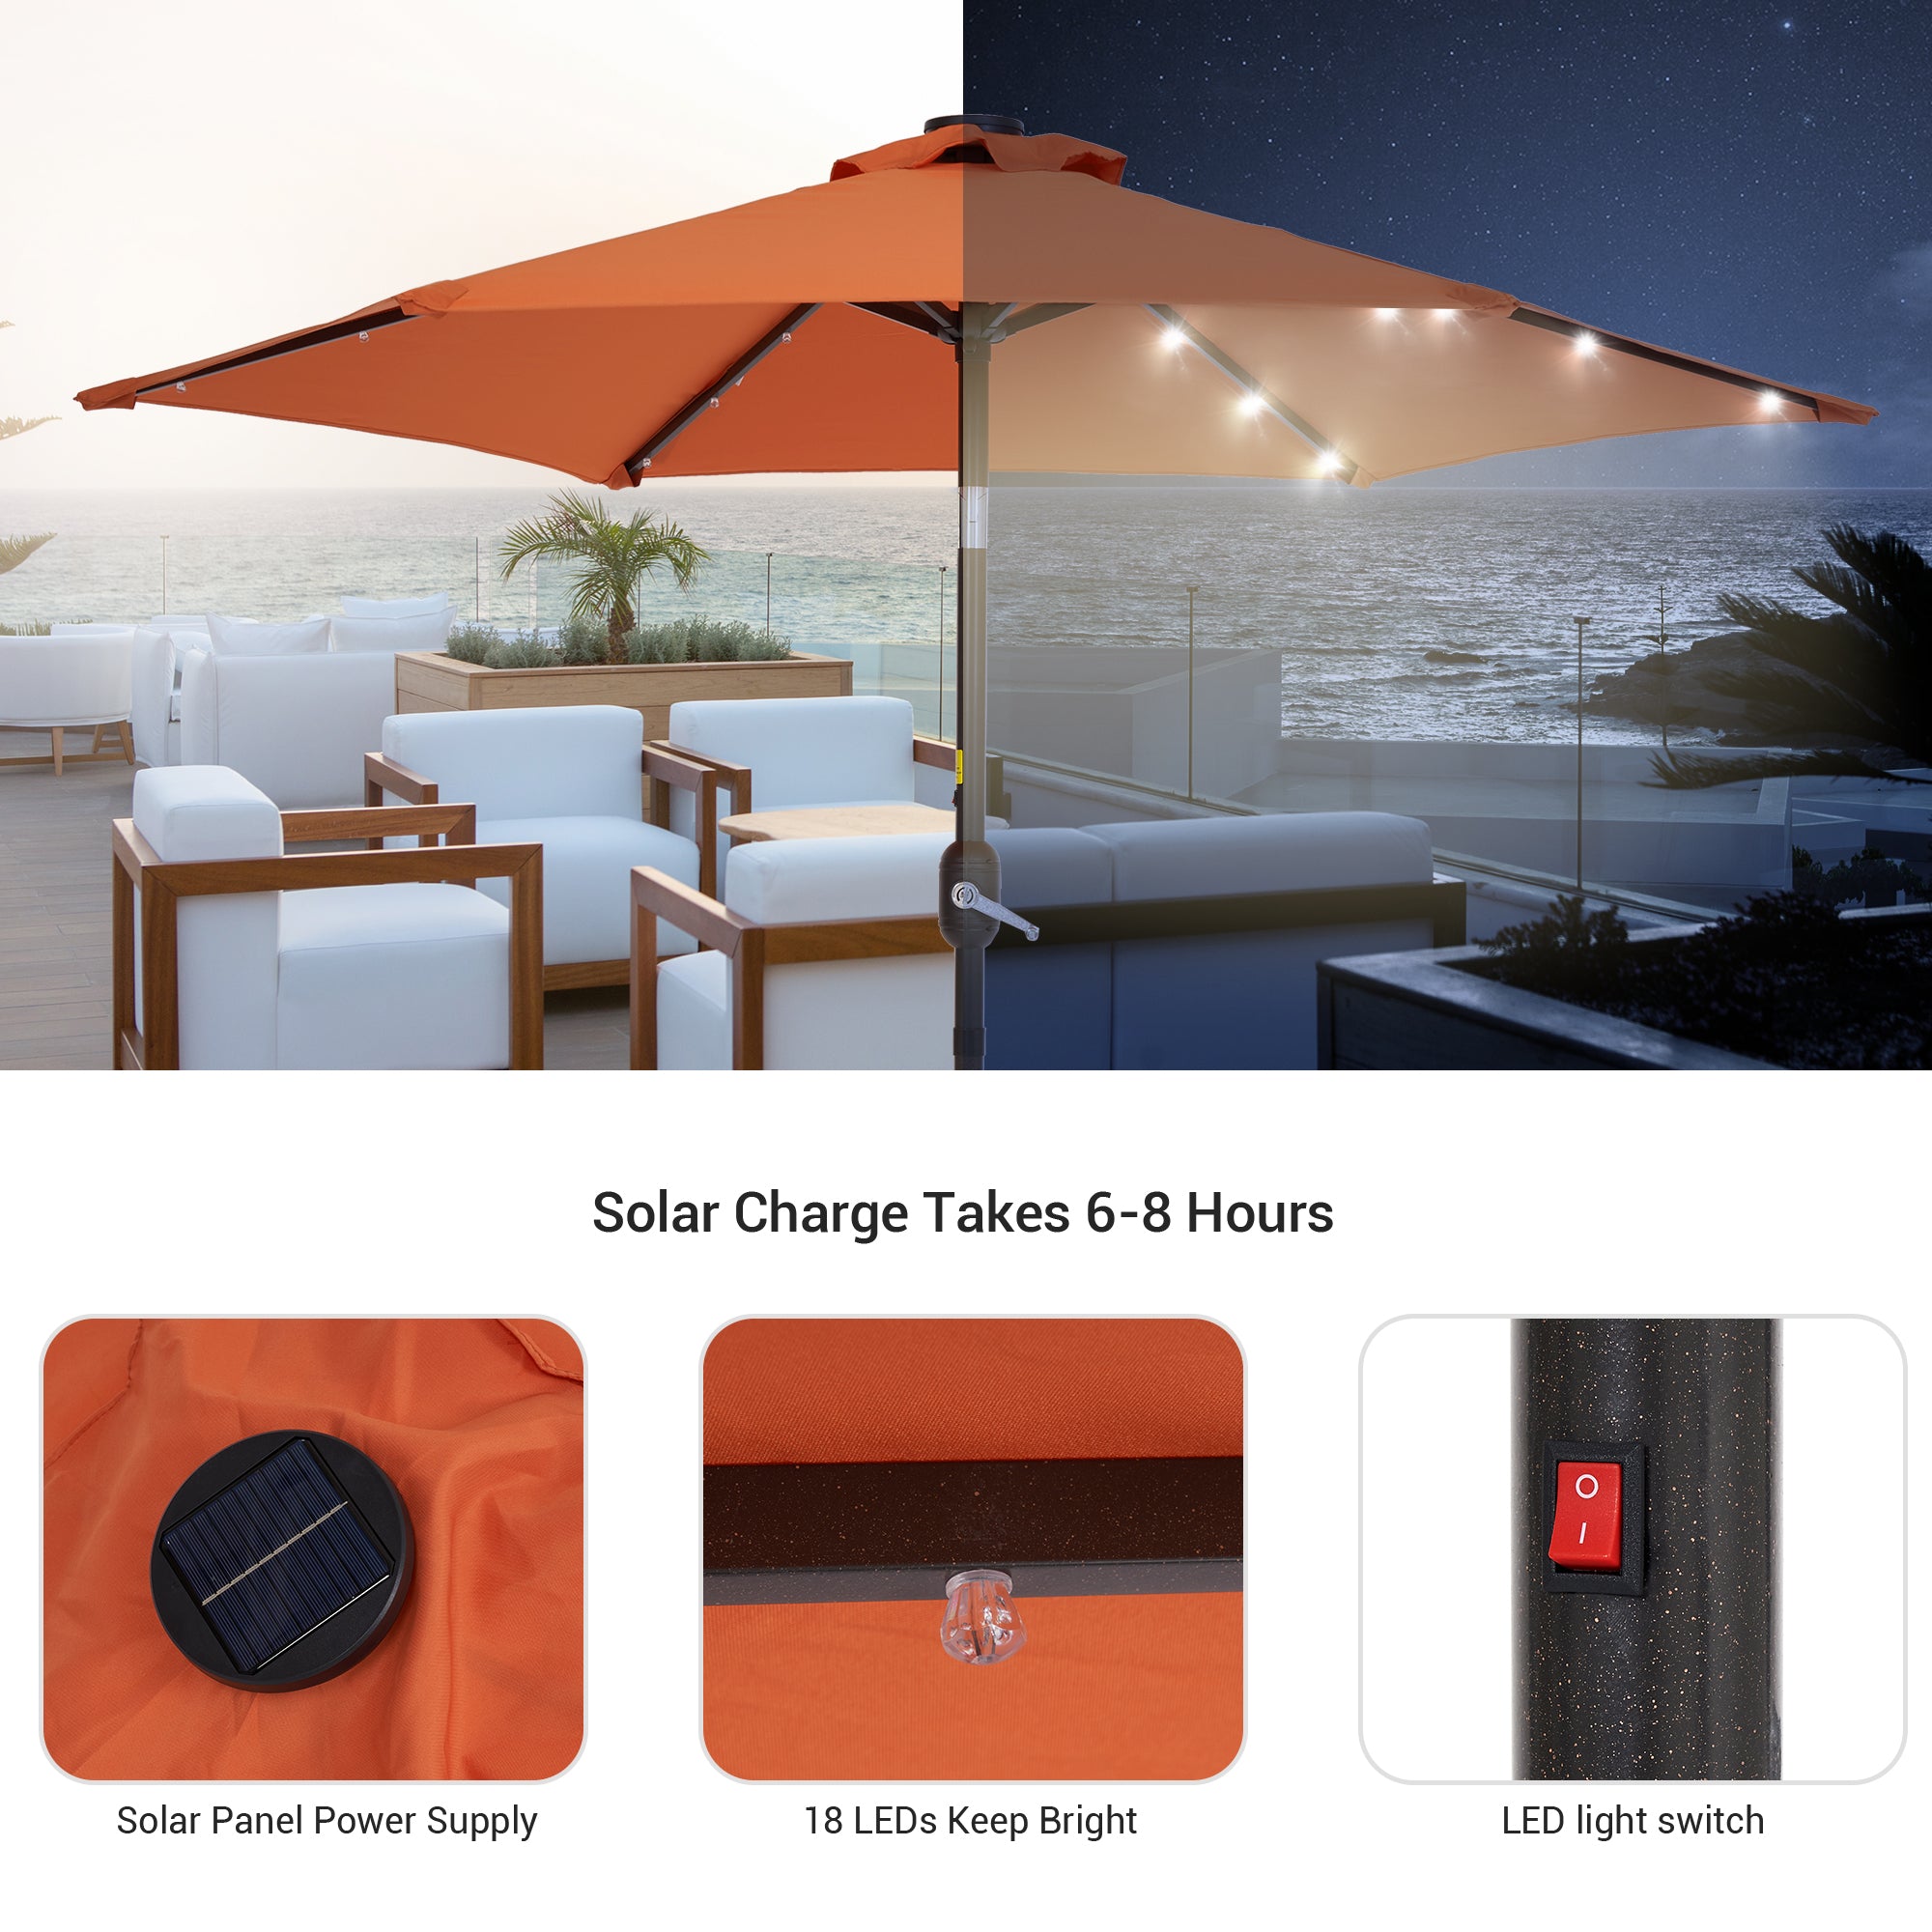 Sonerlic 7.5ft LED Patio Outdoor Shade Table Umbrella with Steel Frame for Yard, Garden, Park,Poolside and Deck,orange